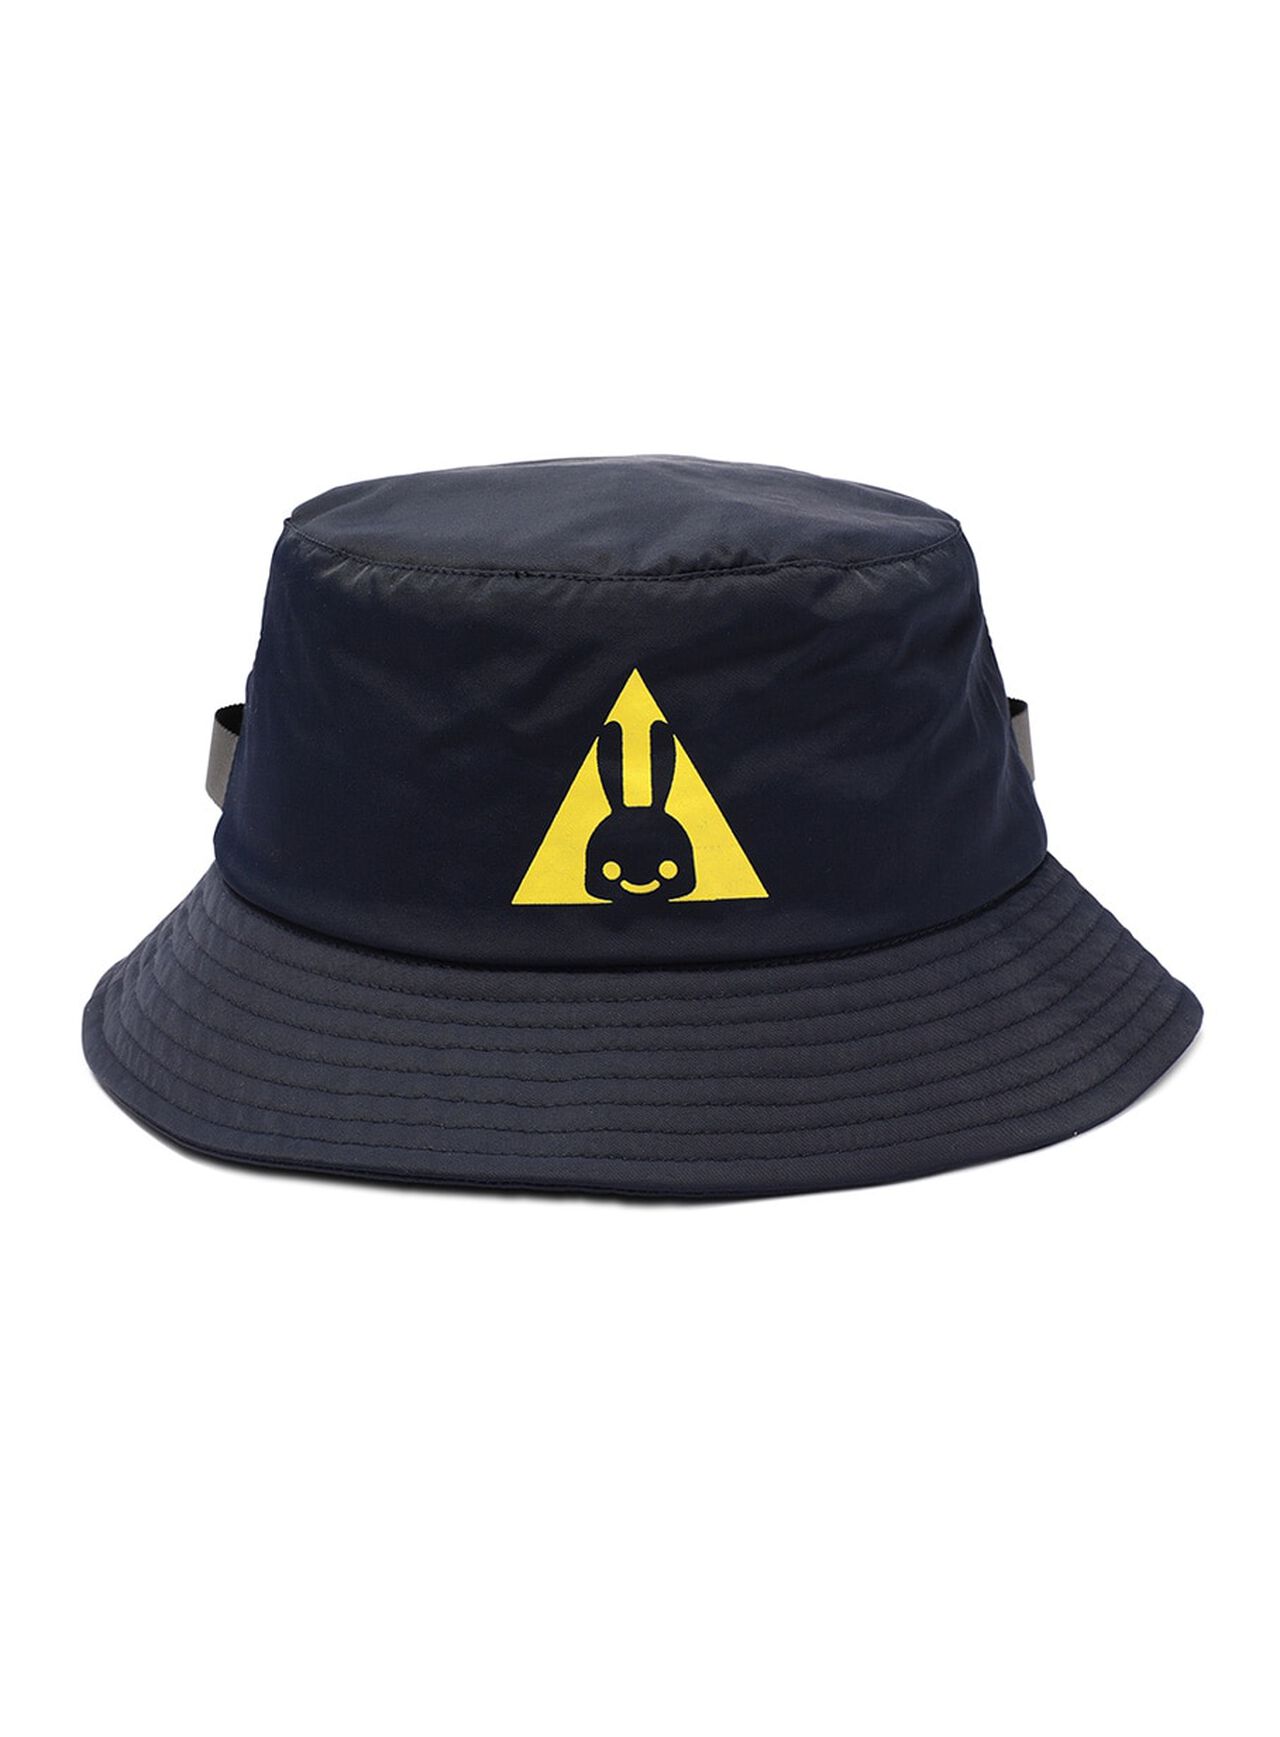 ODC Bucket Hat,ONE, large image number 0